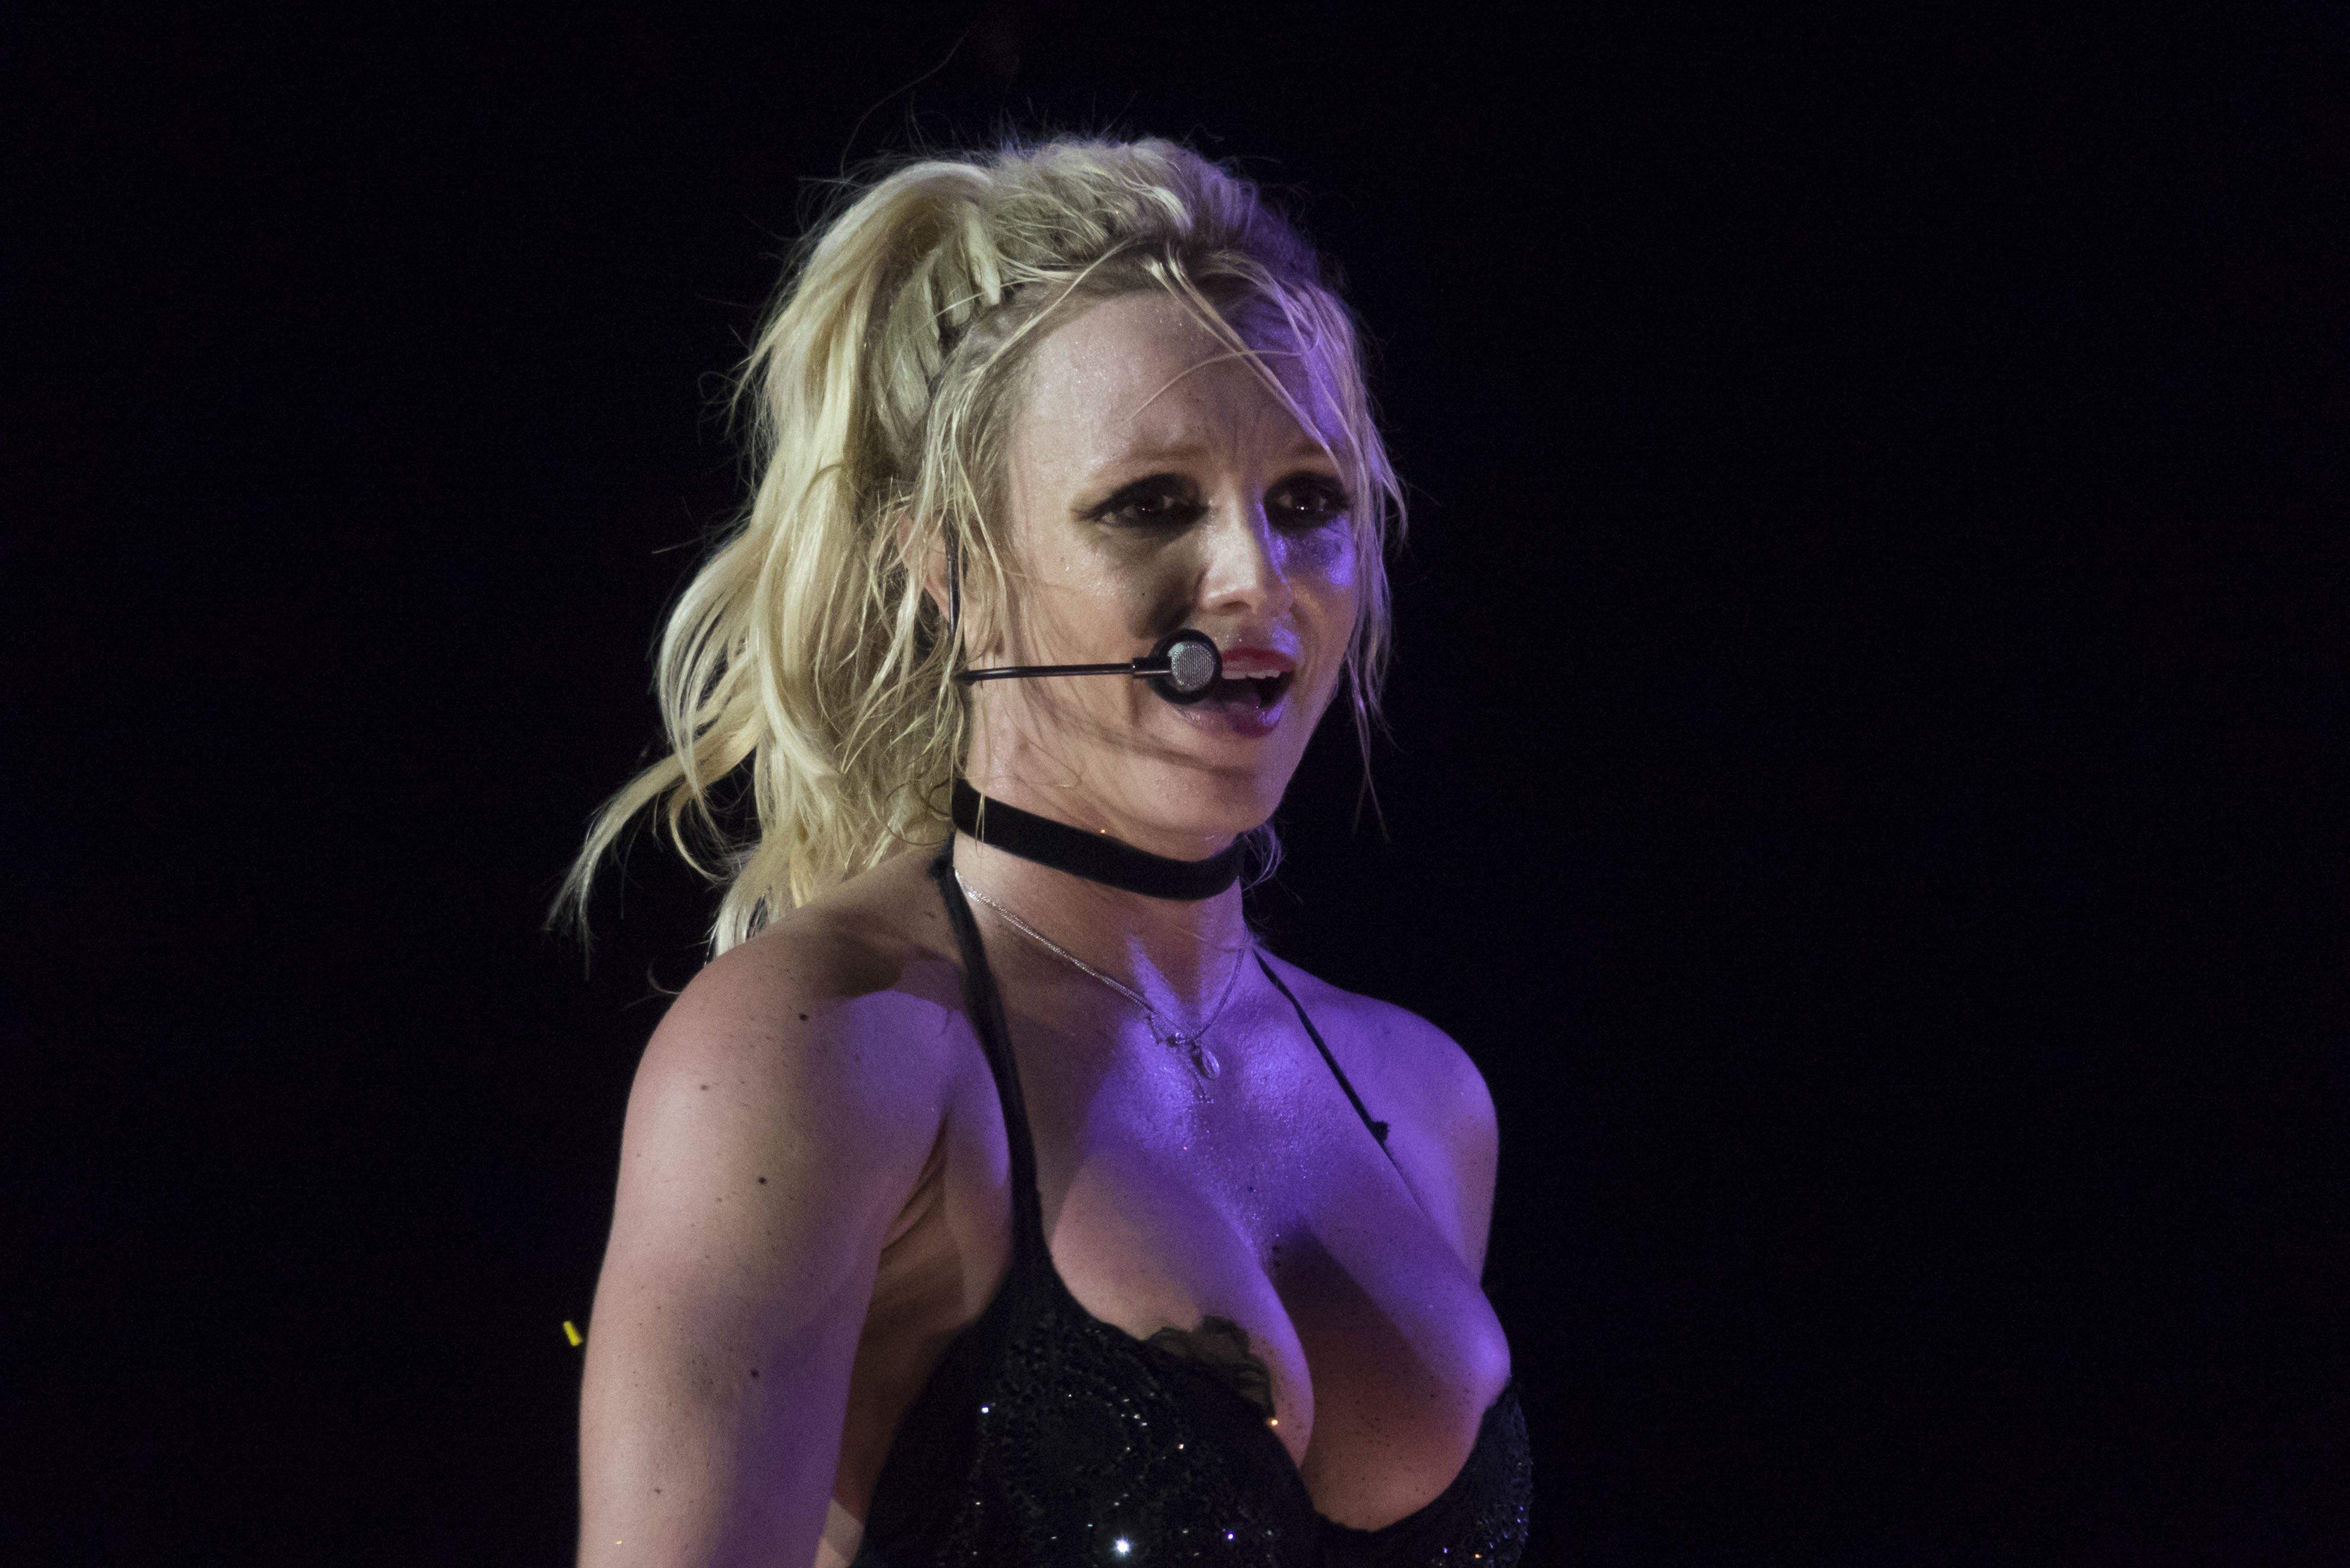 berry nader recommends britney spears nipples pic